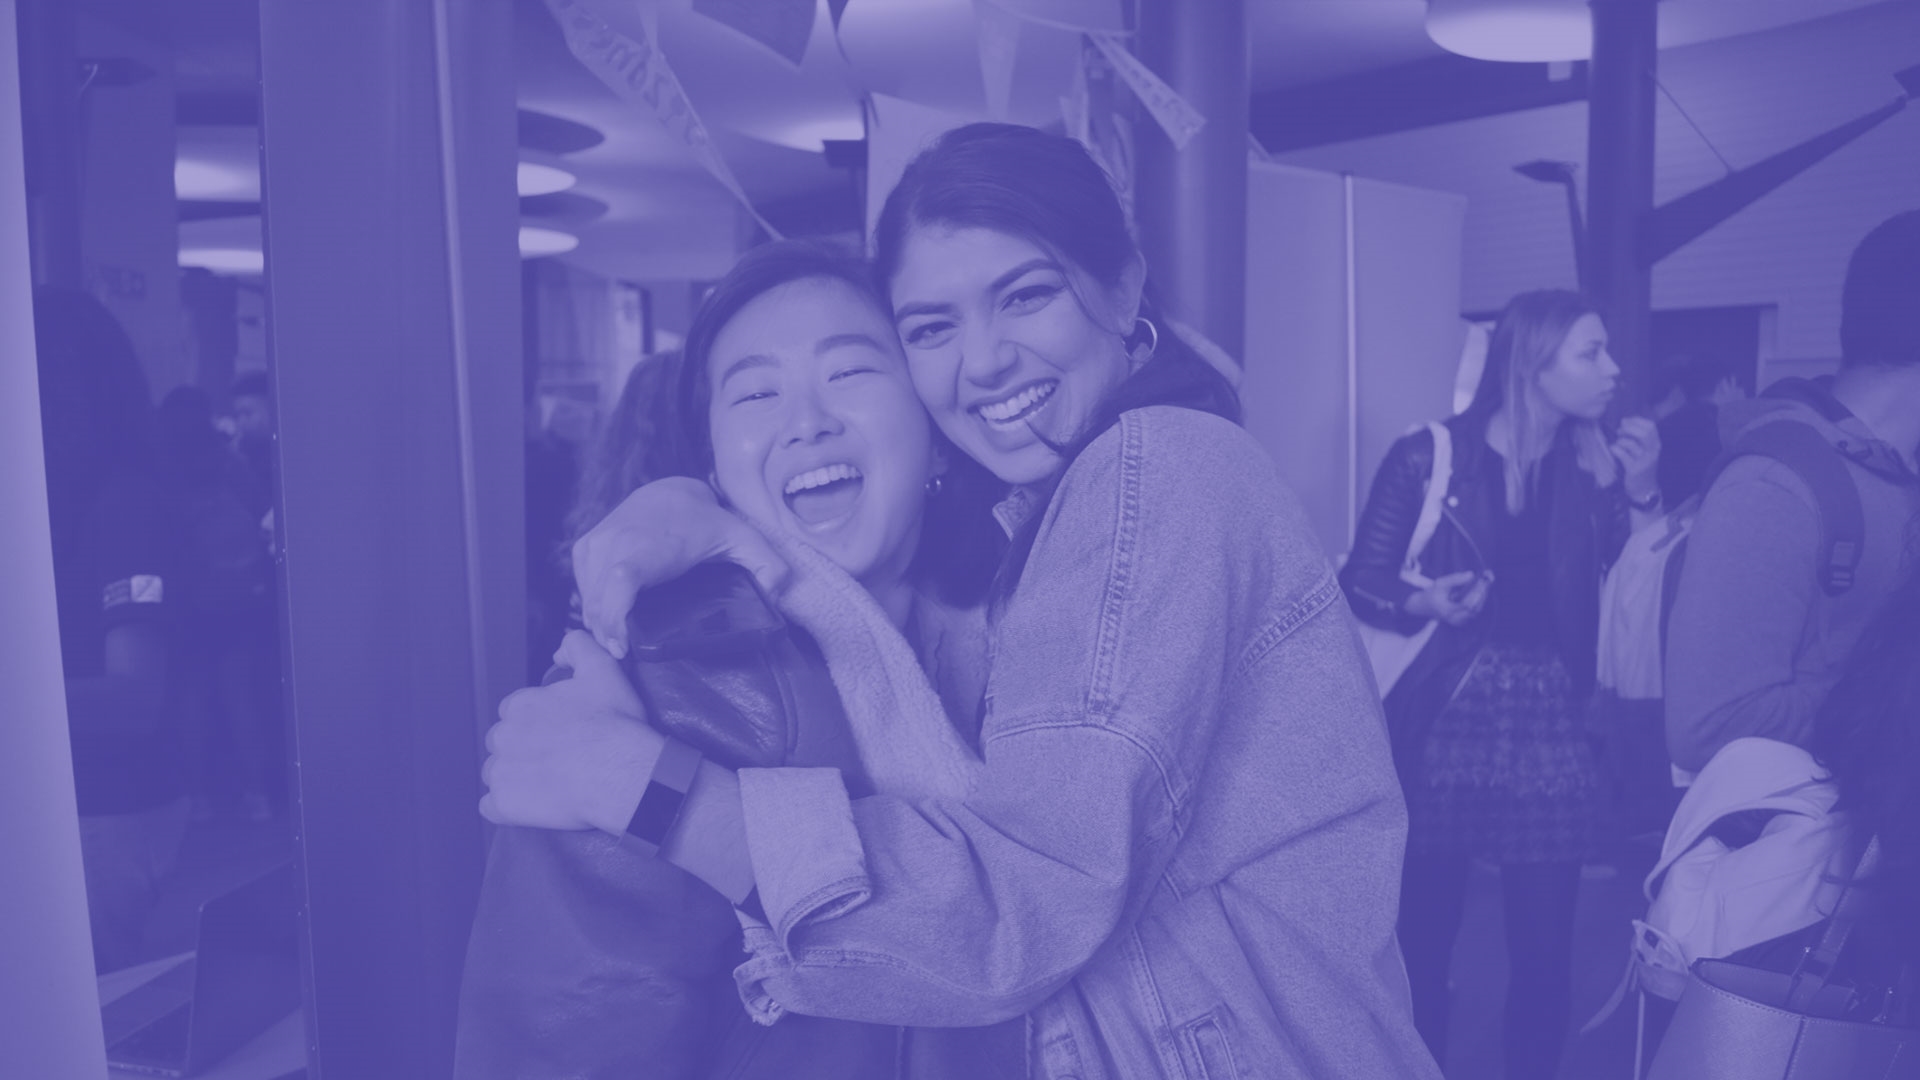 Two students smiling and hugging each other